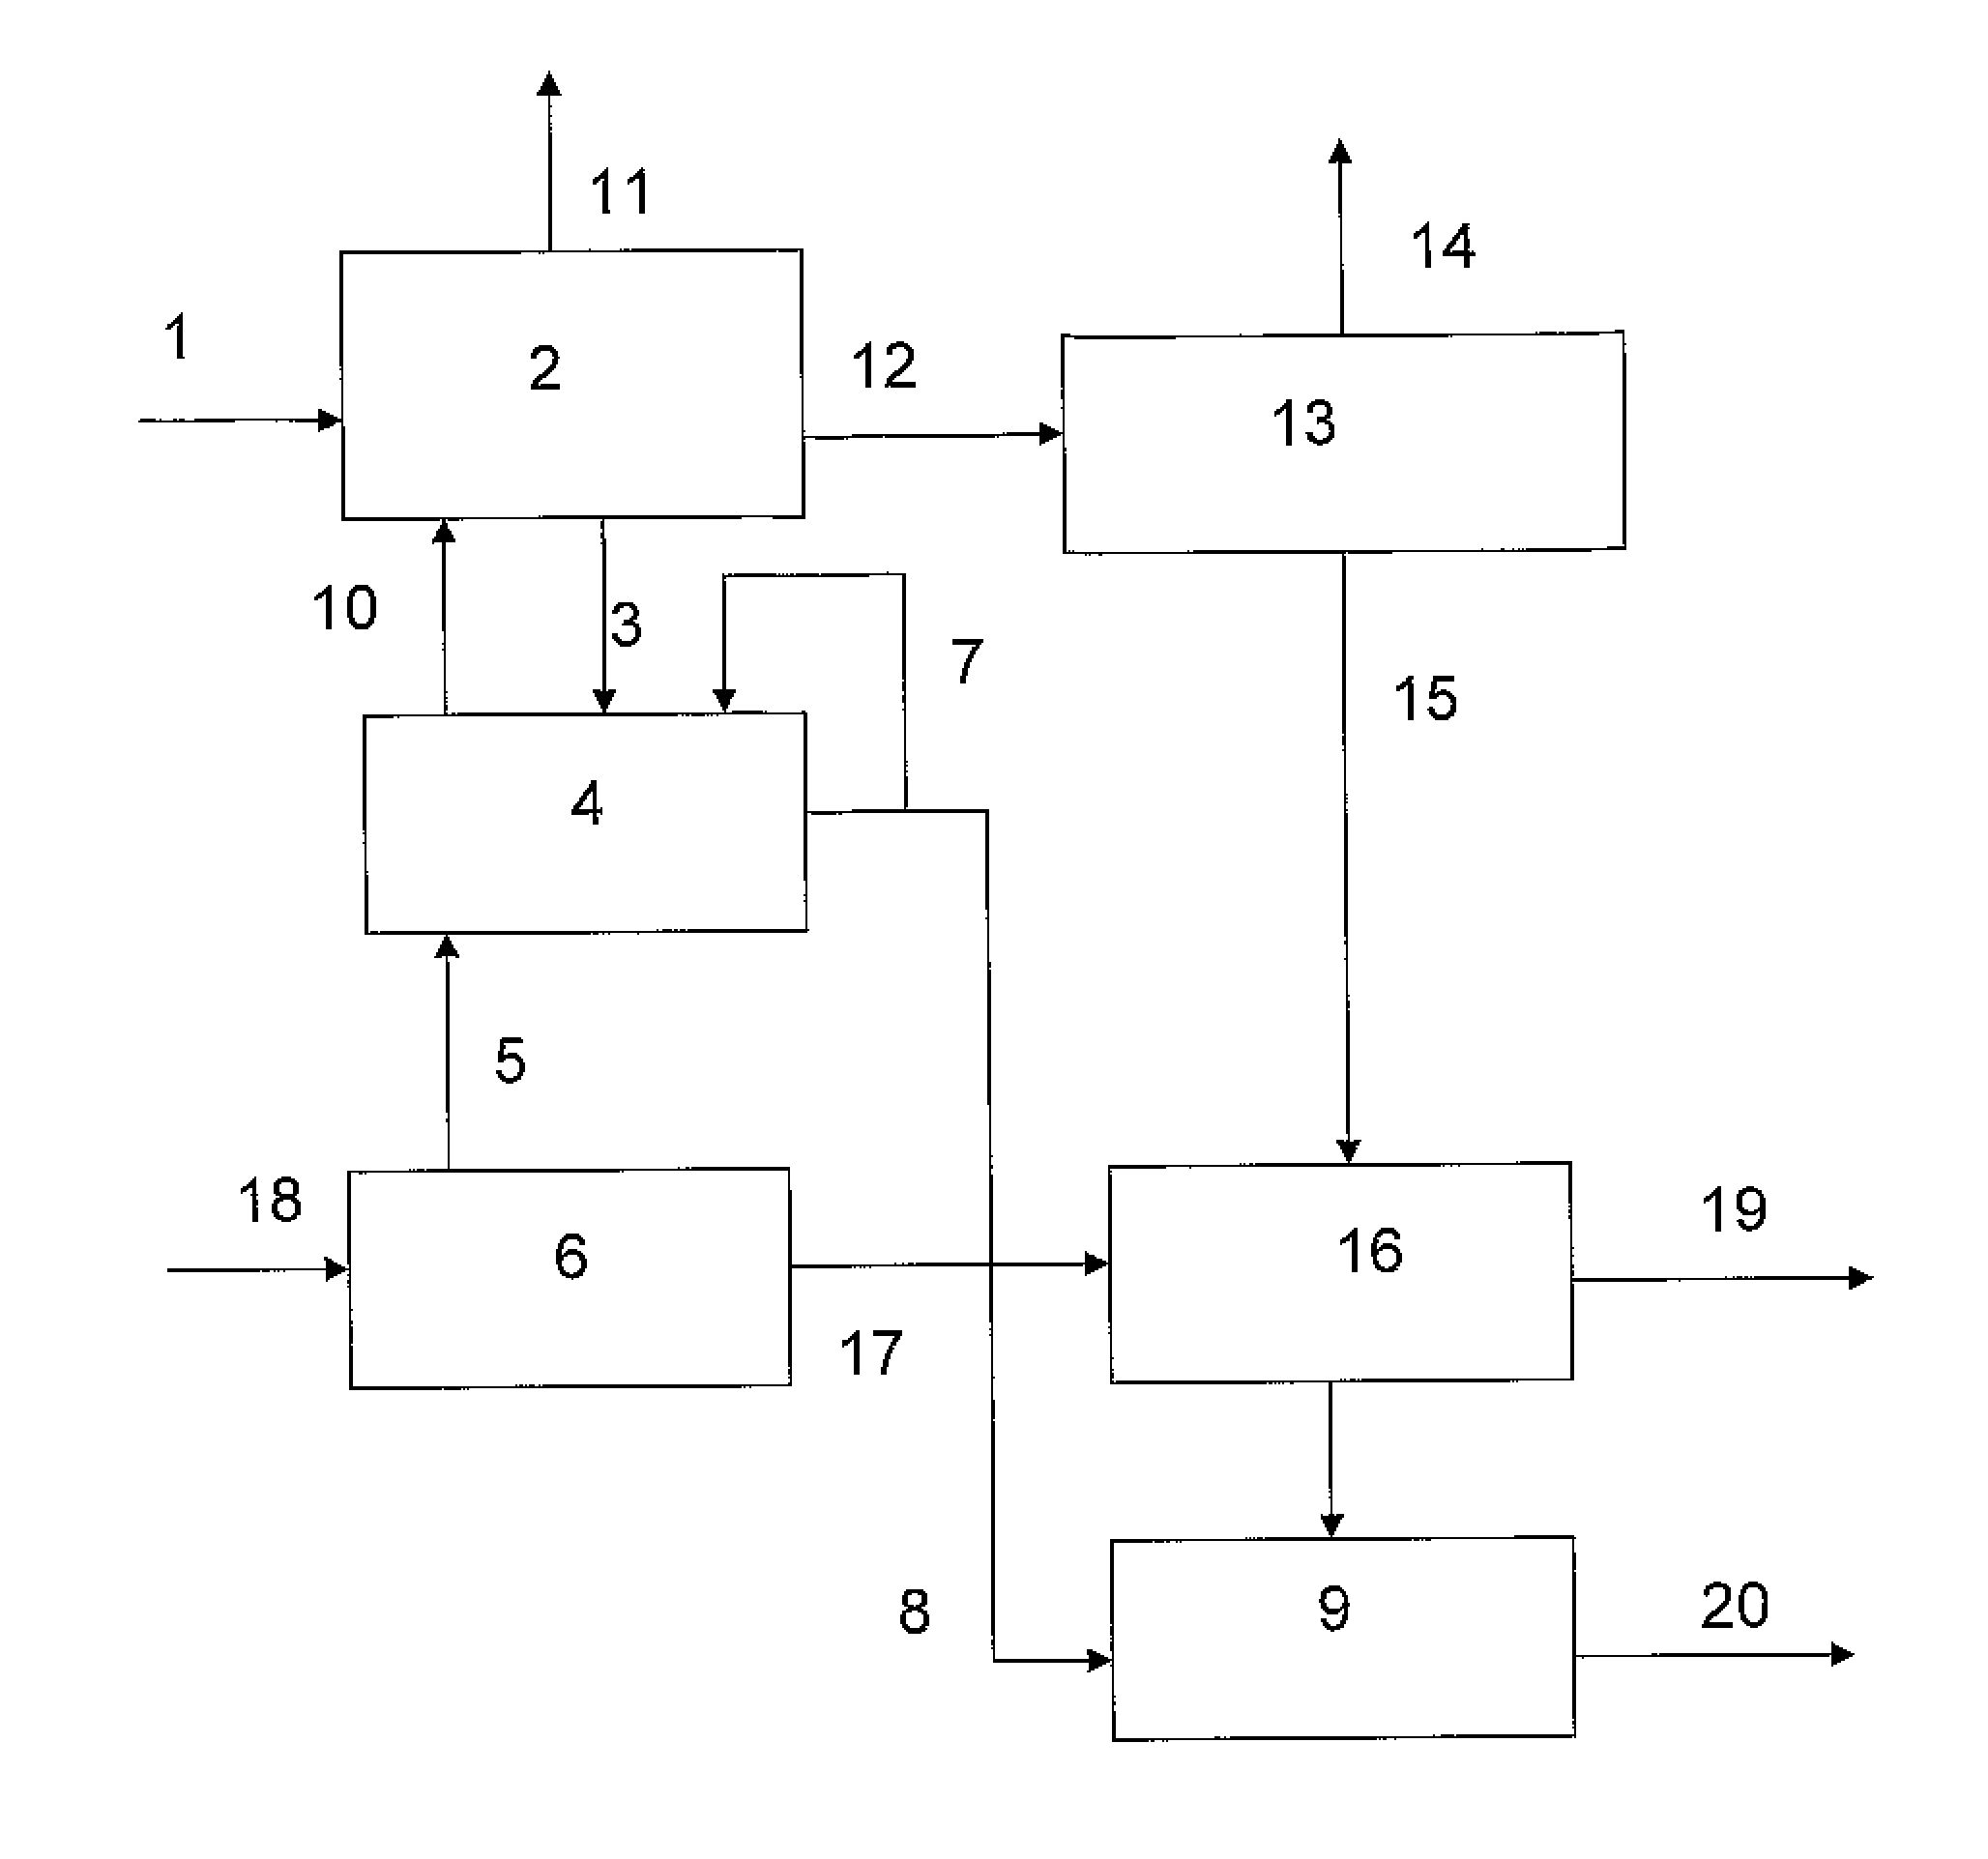 Integrated process for the manufacture of olefins and intermediates for the productions of ammonia and urea